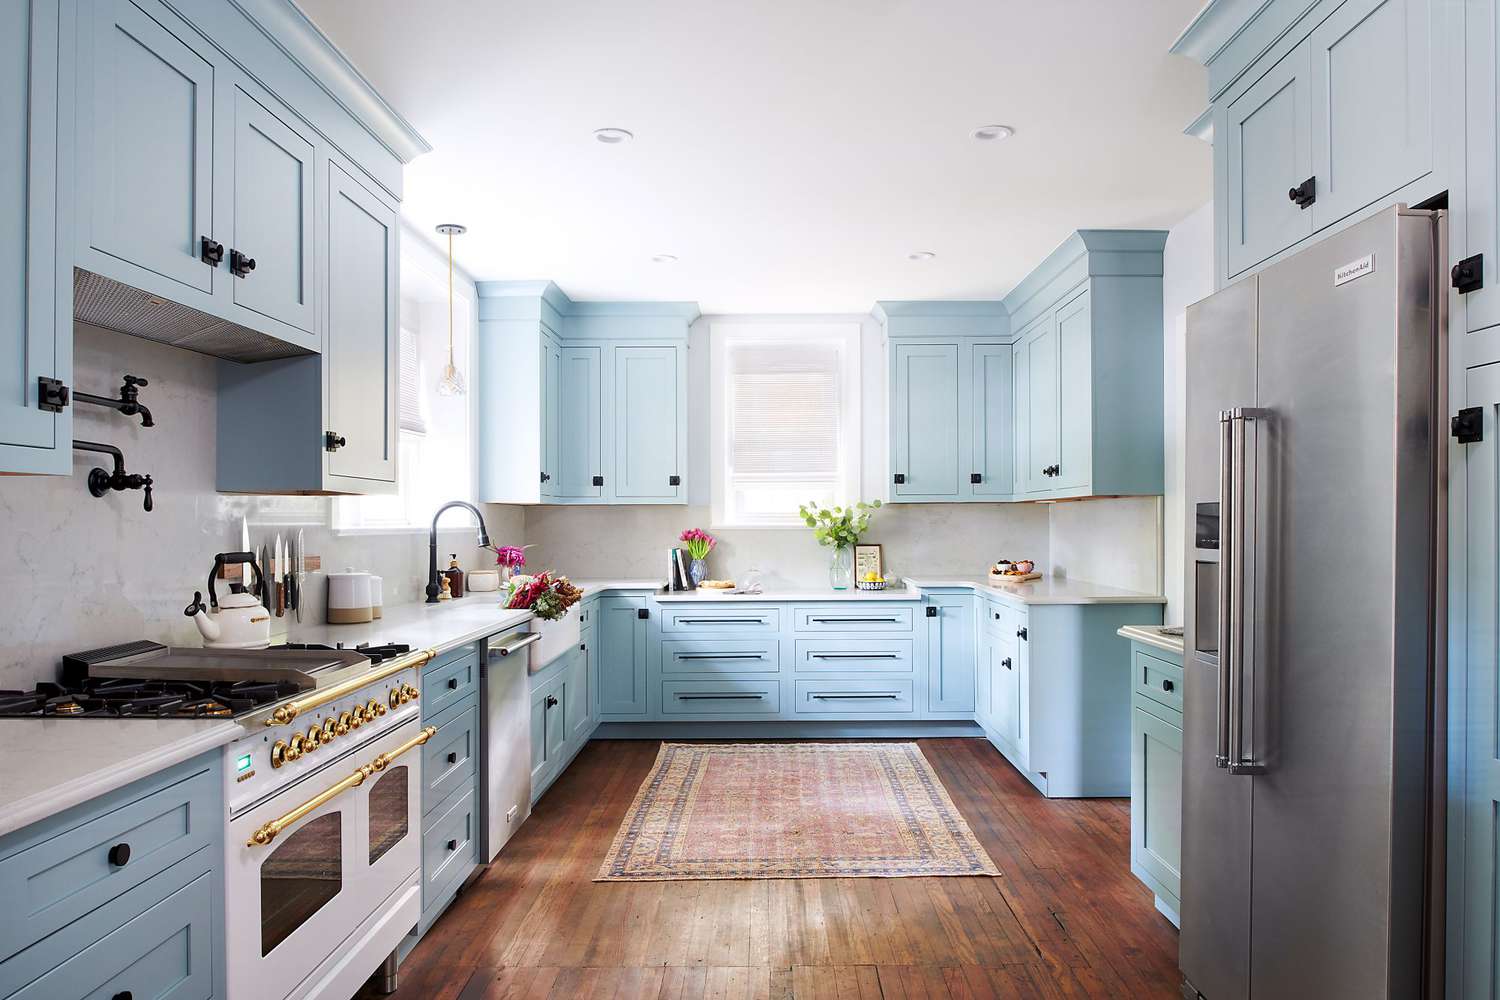 10 Helpful Tips When Painting Your Kitchen Cabinets